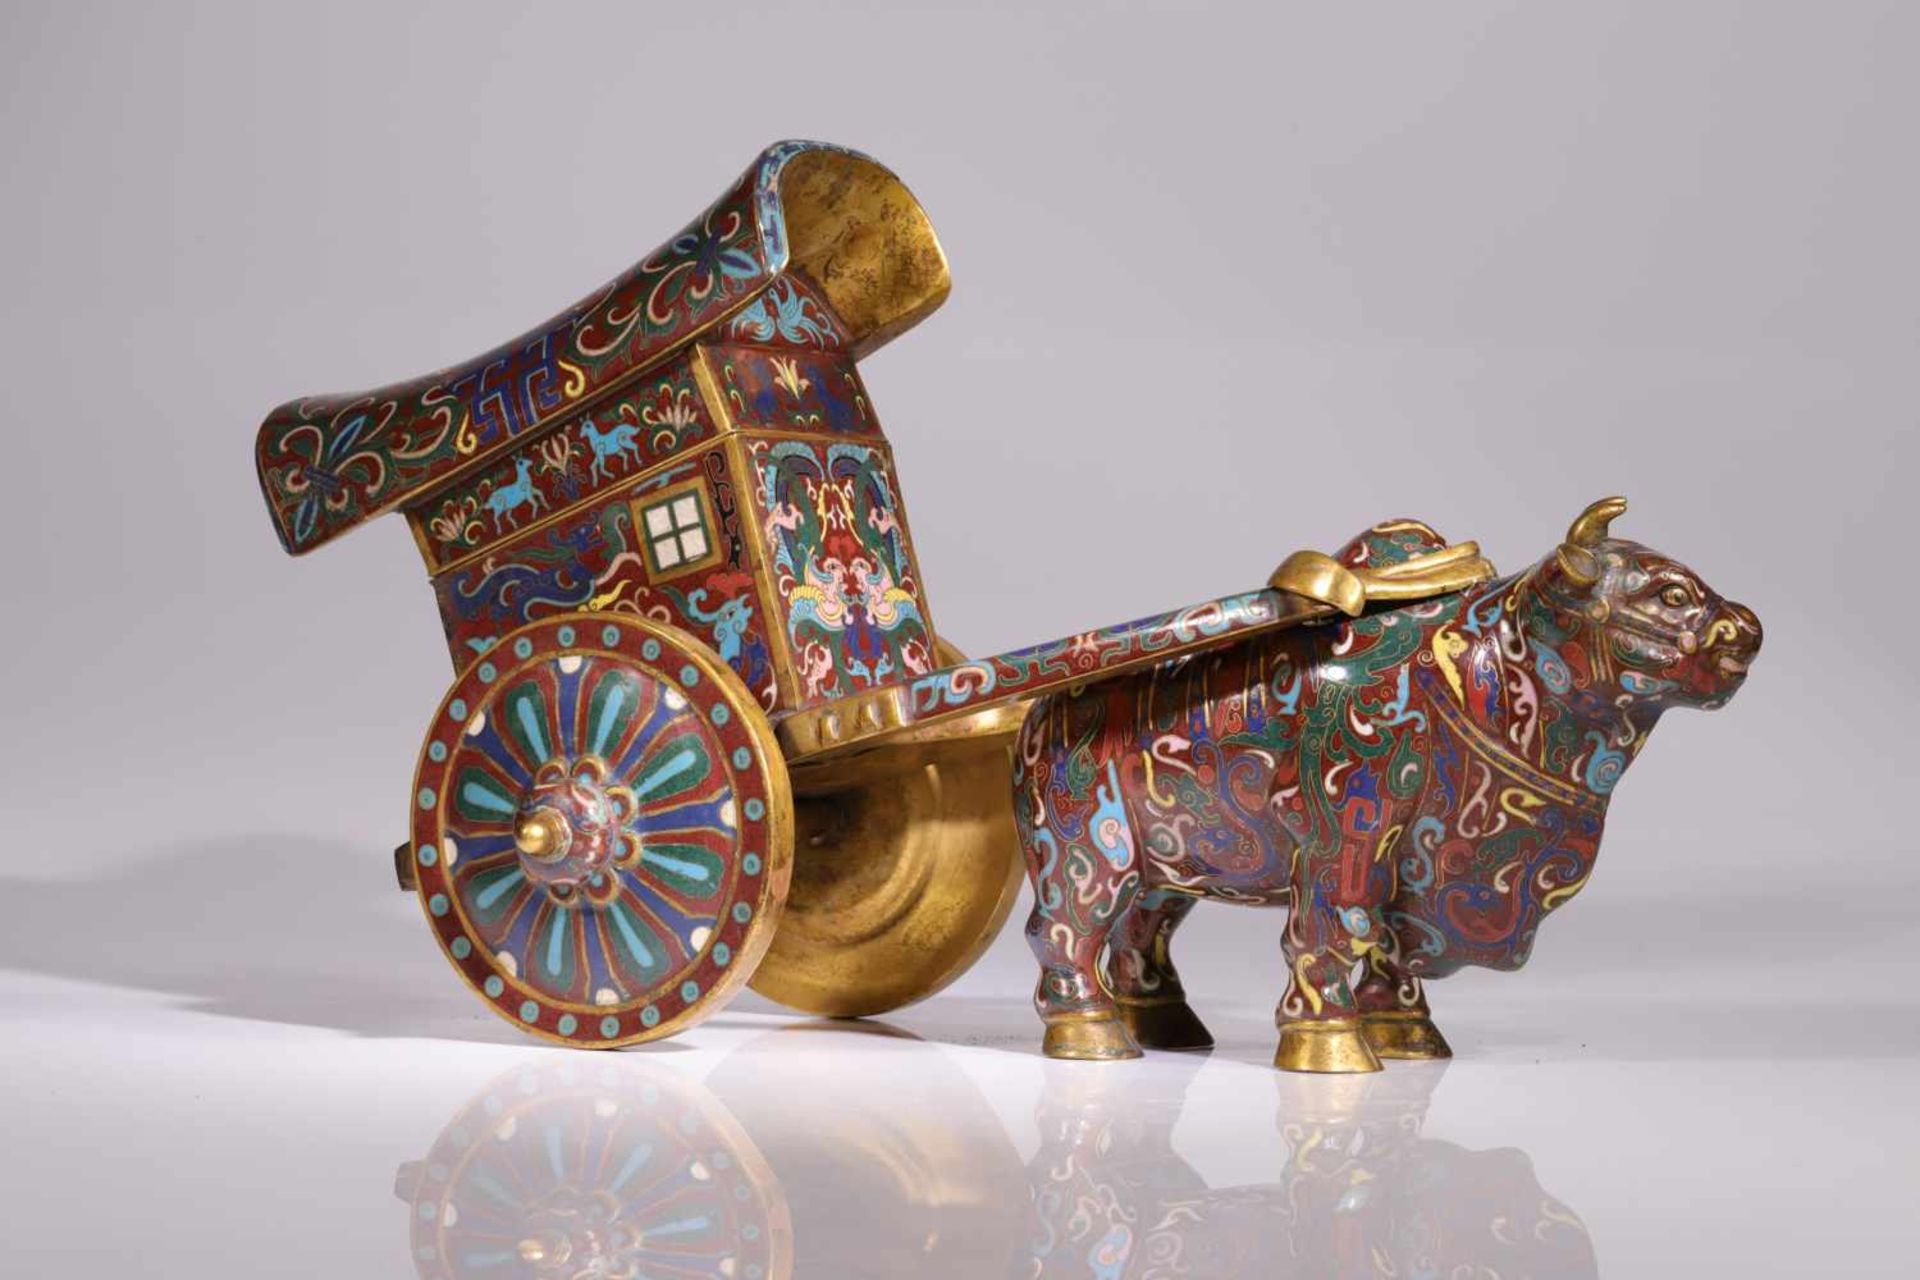 OX-CARTCloisonnèChina, late Qing DynastyDimensions: Height 26 cm / Wide 50 cm / Depth 23 cmWeight: